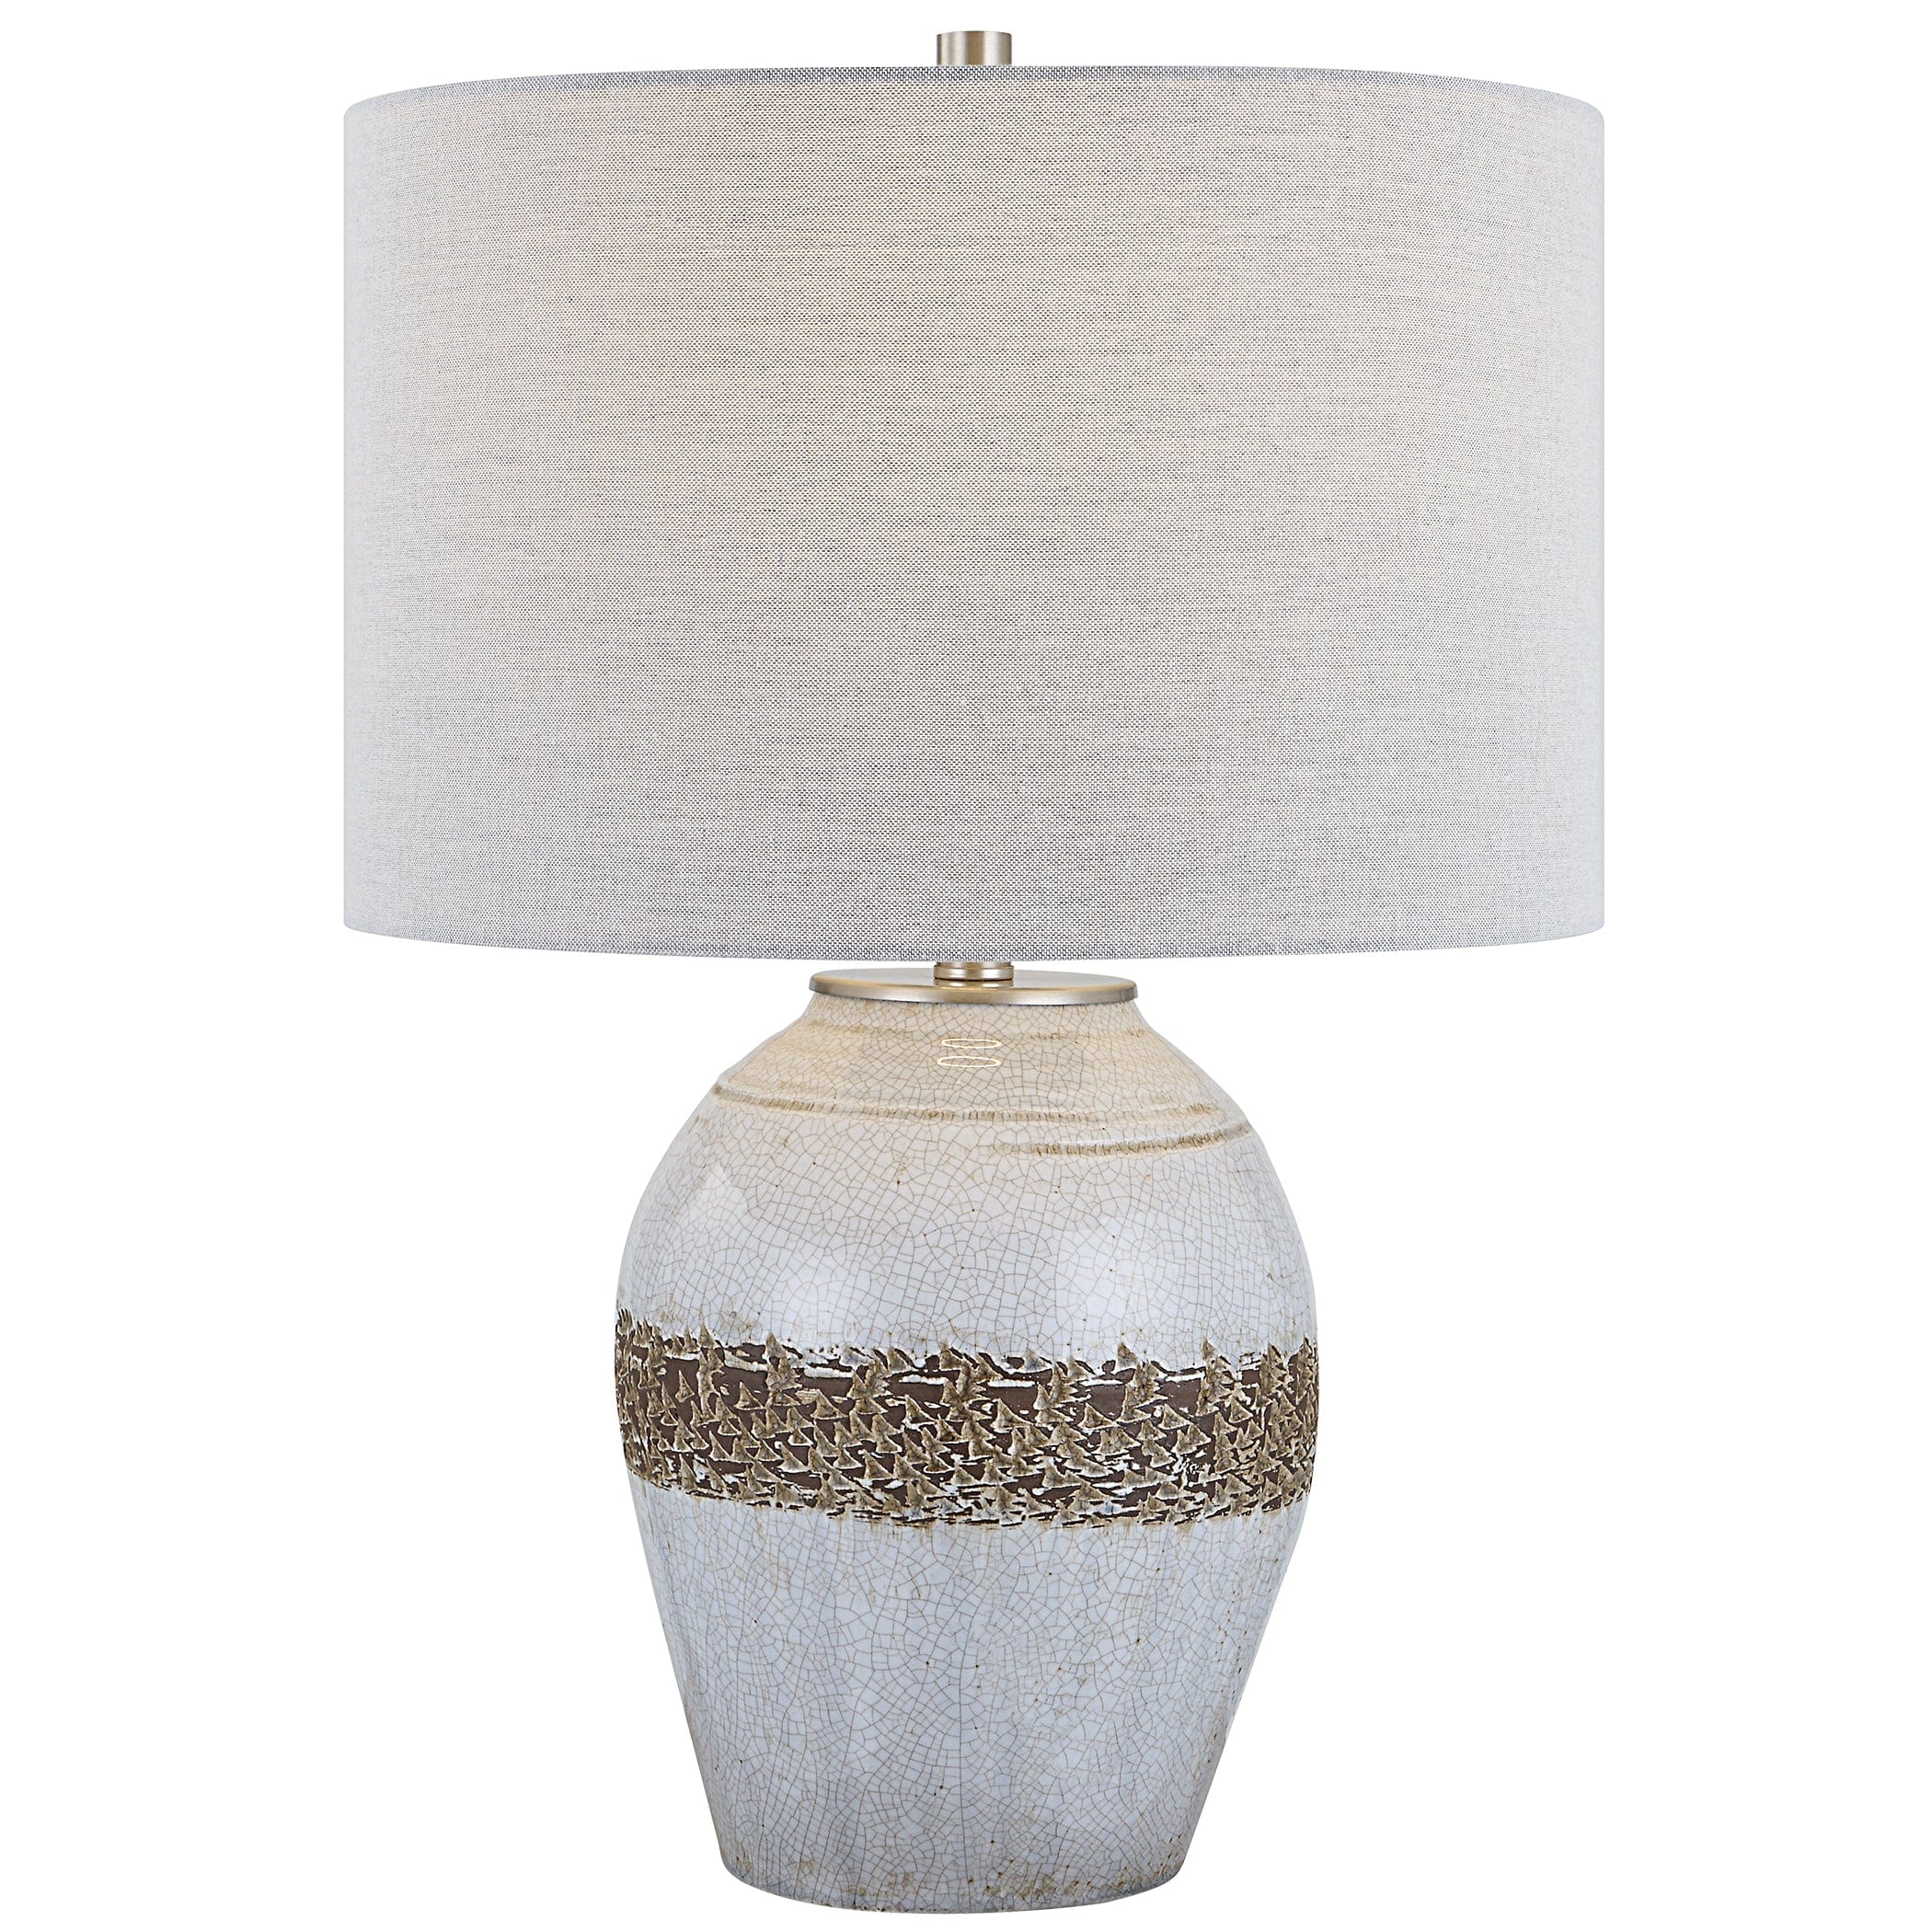 Poul Crackled Table Lamp Uttermost